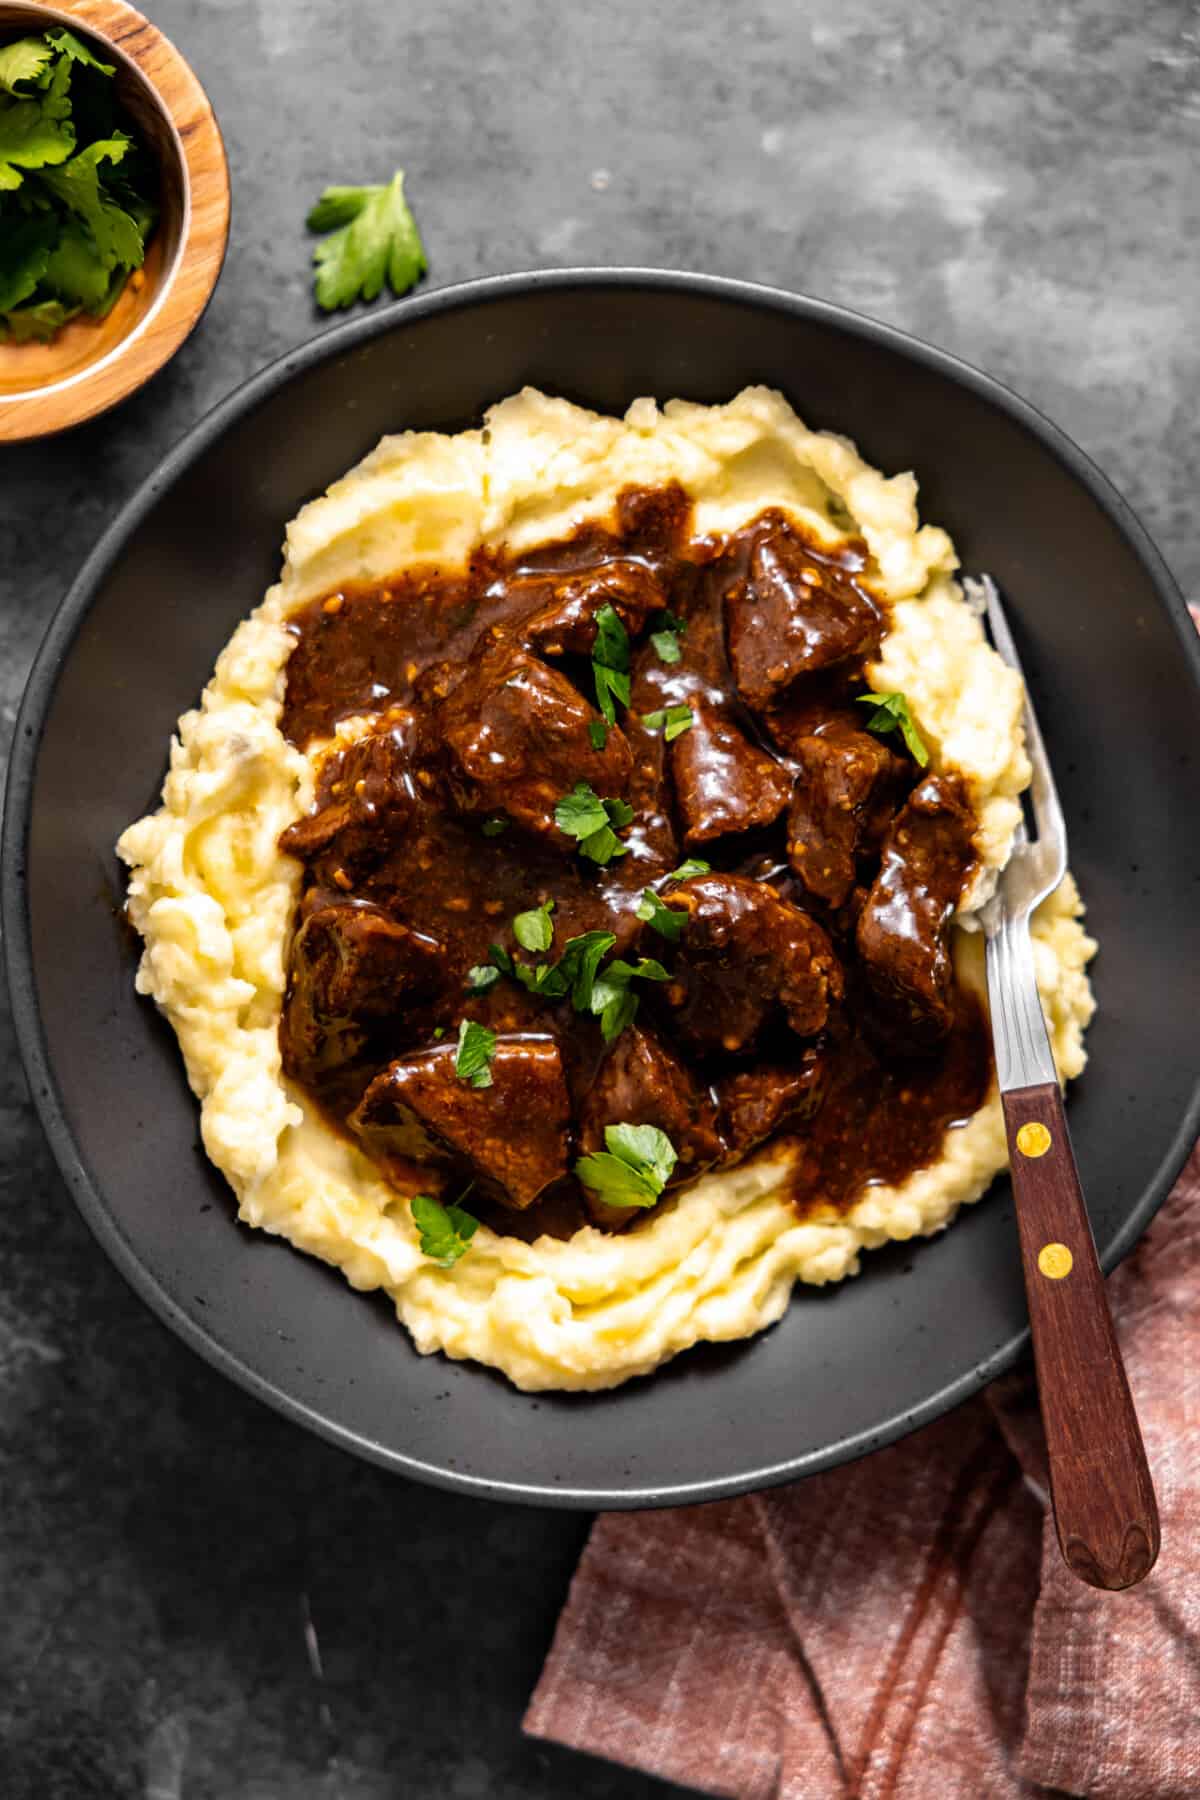 Bowl with mashed potatoes topped with beef tips and gravy.